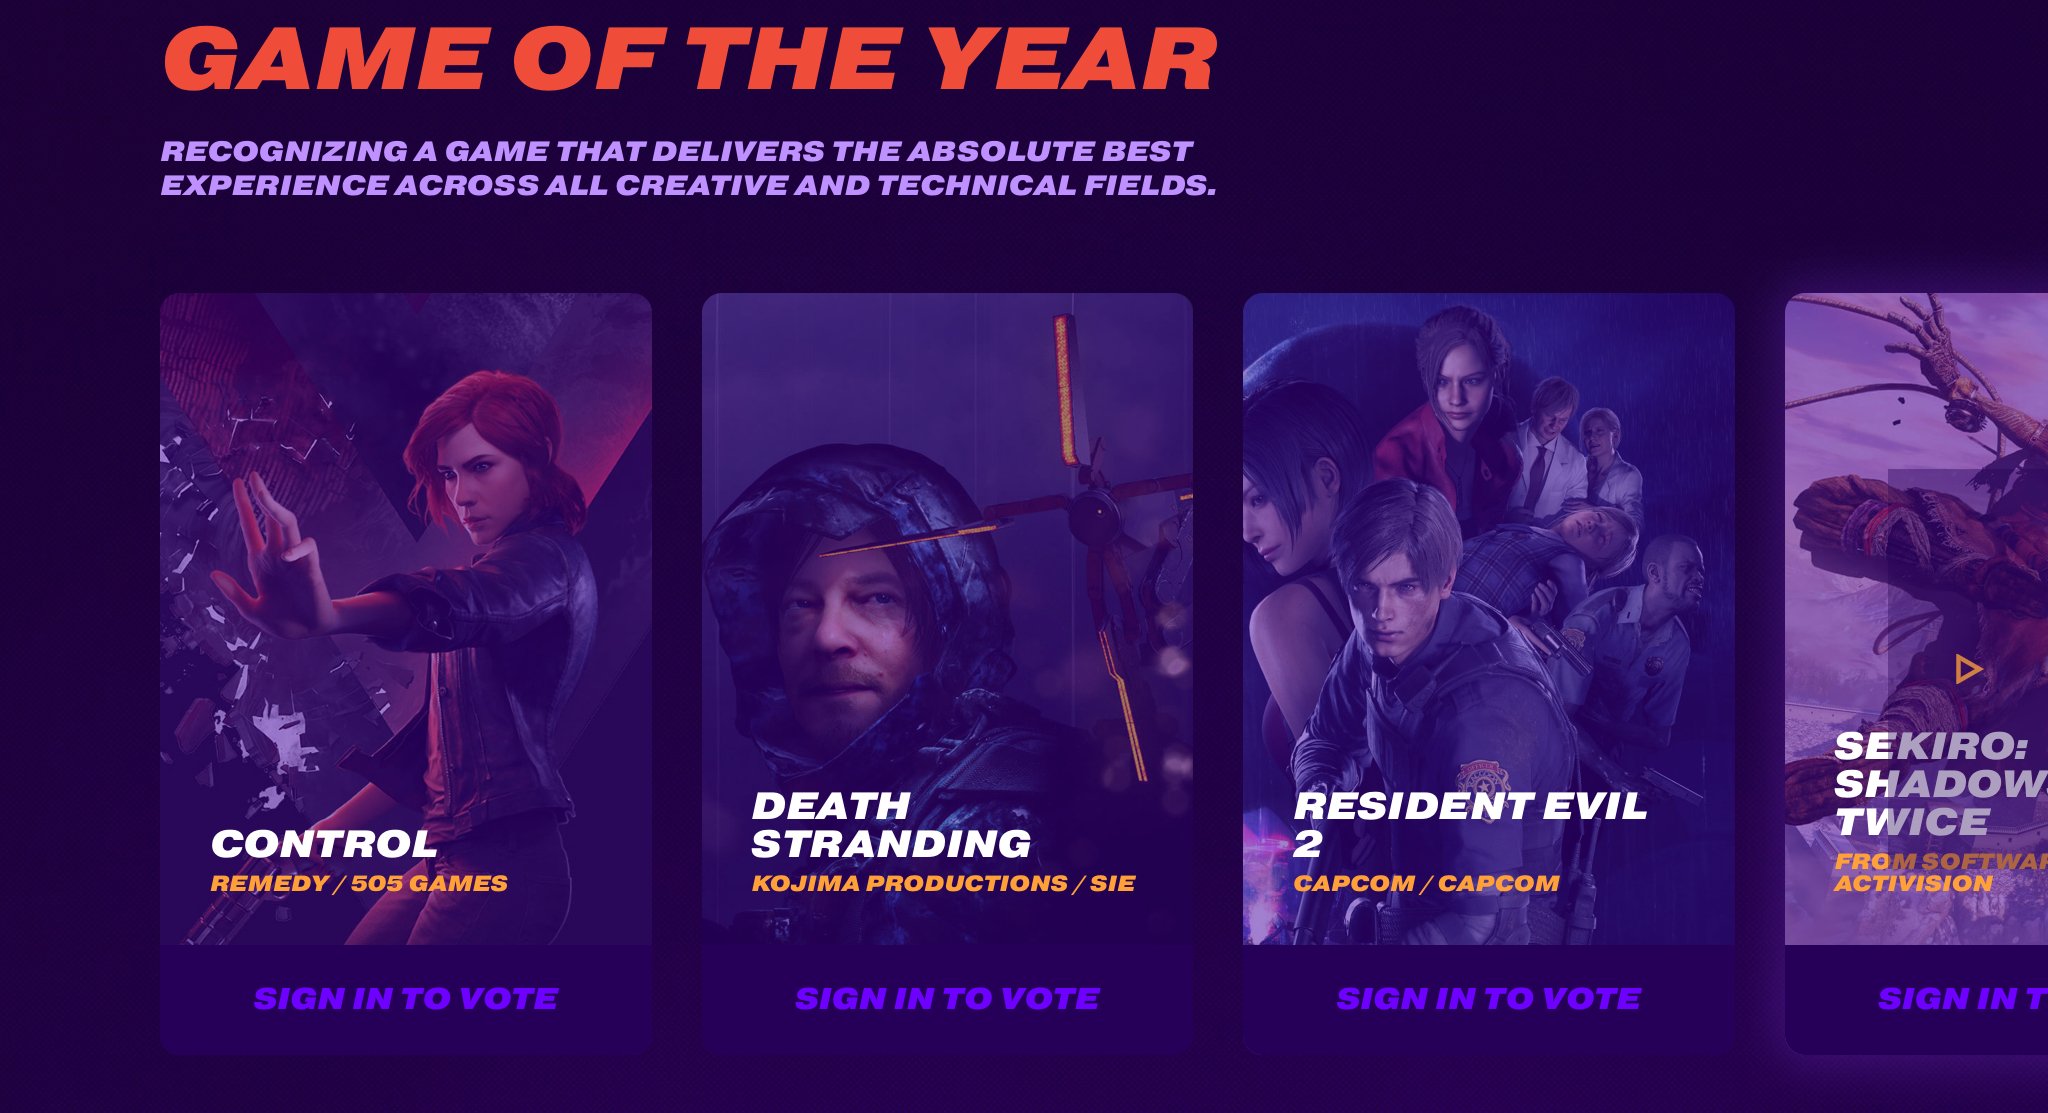 Game Awards 2019 Full List of Nominees Revealed: Death Stranding leads way  on 10 Nominations - Daily Star